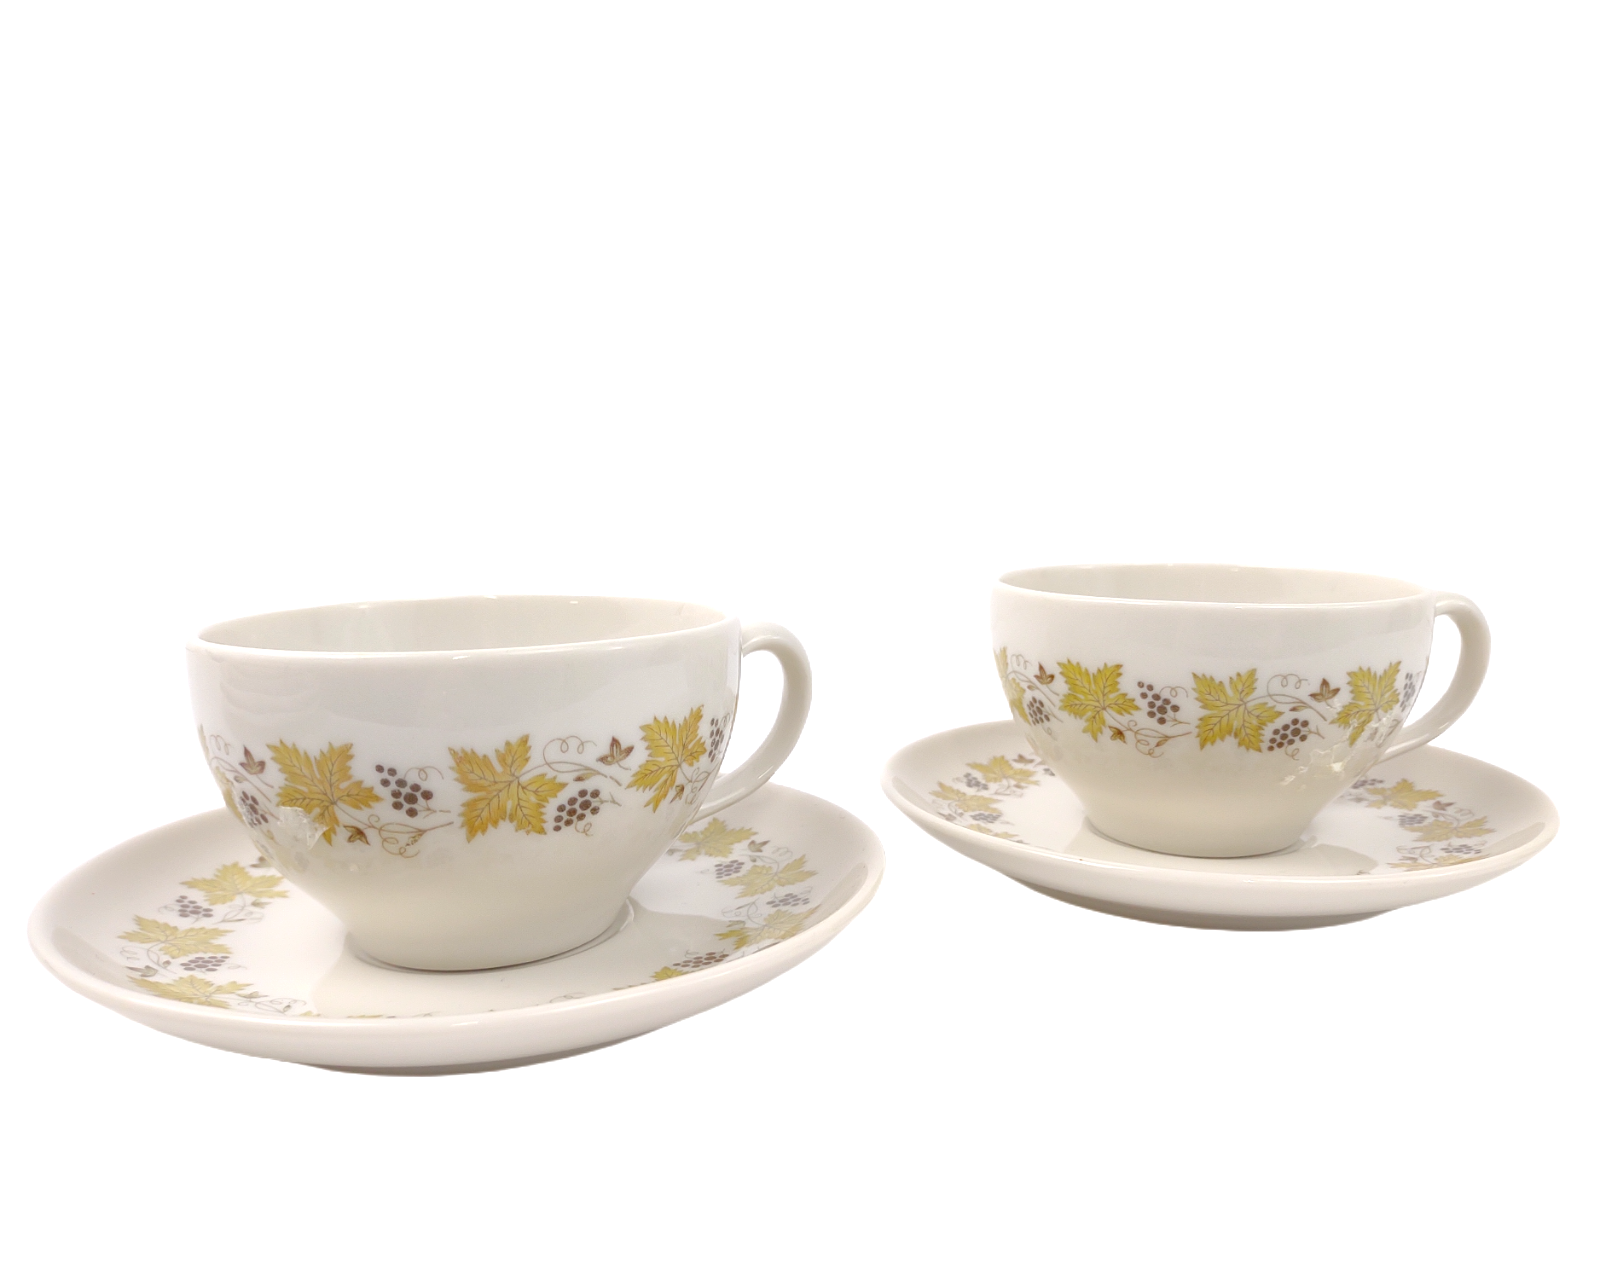 Primary image for Set of 2 Syracuse China VINTAGE Cups & Saucers c1966-70, Grape Leaves Carefree